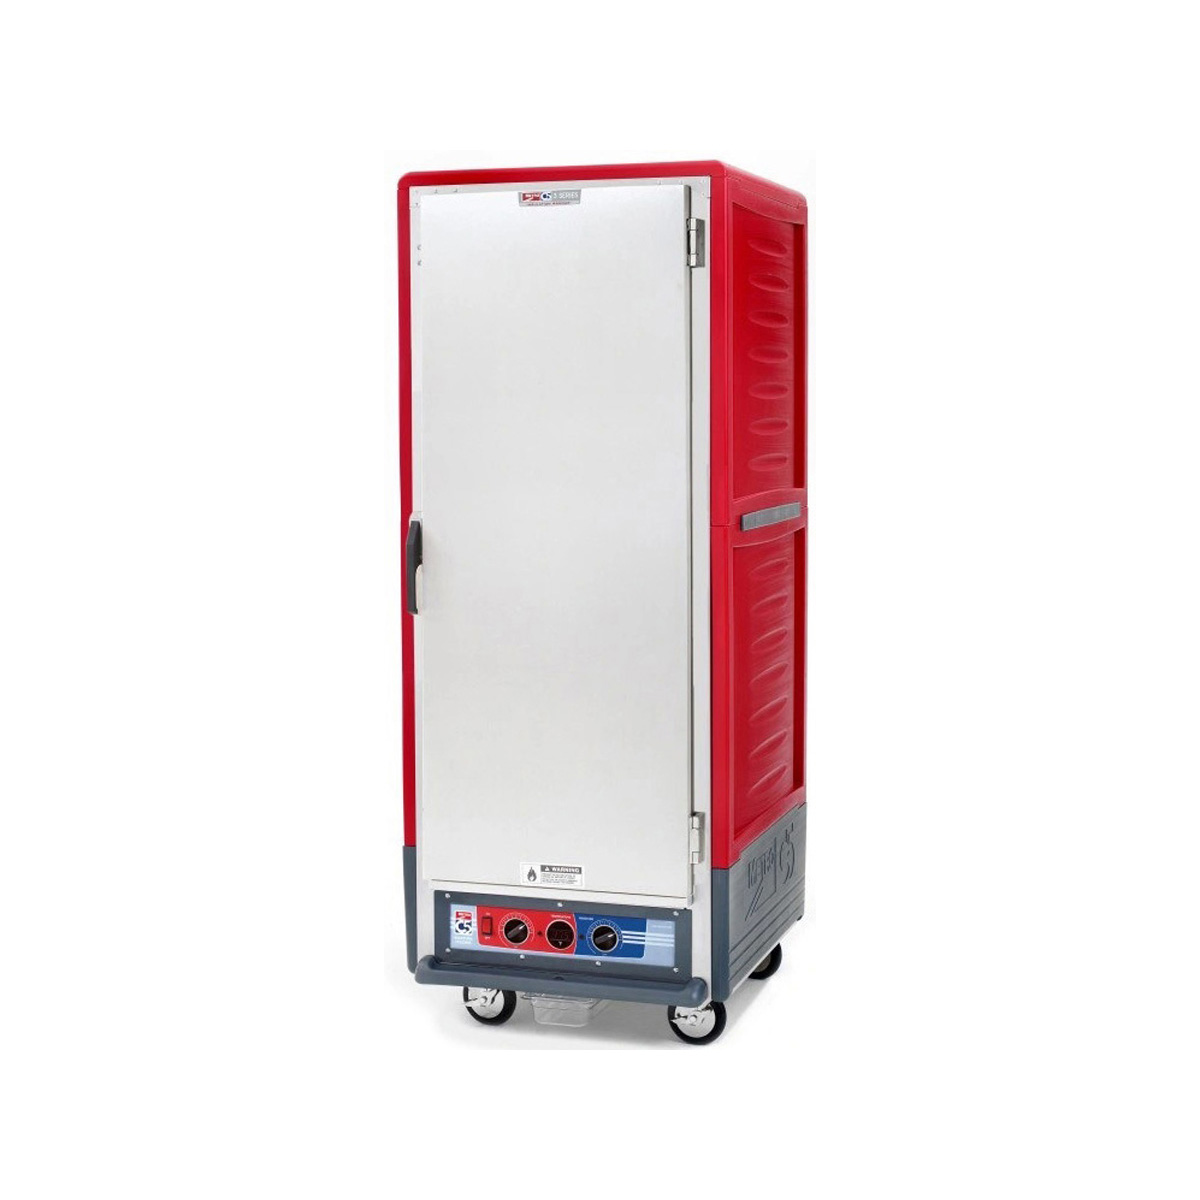 Metro C539-MFS-UA C5 3 Series Insulated Mobile Proofing and Holding Cabinet